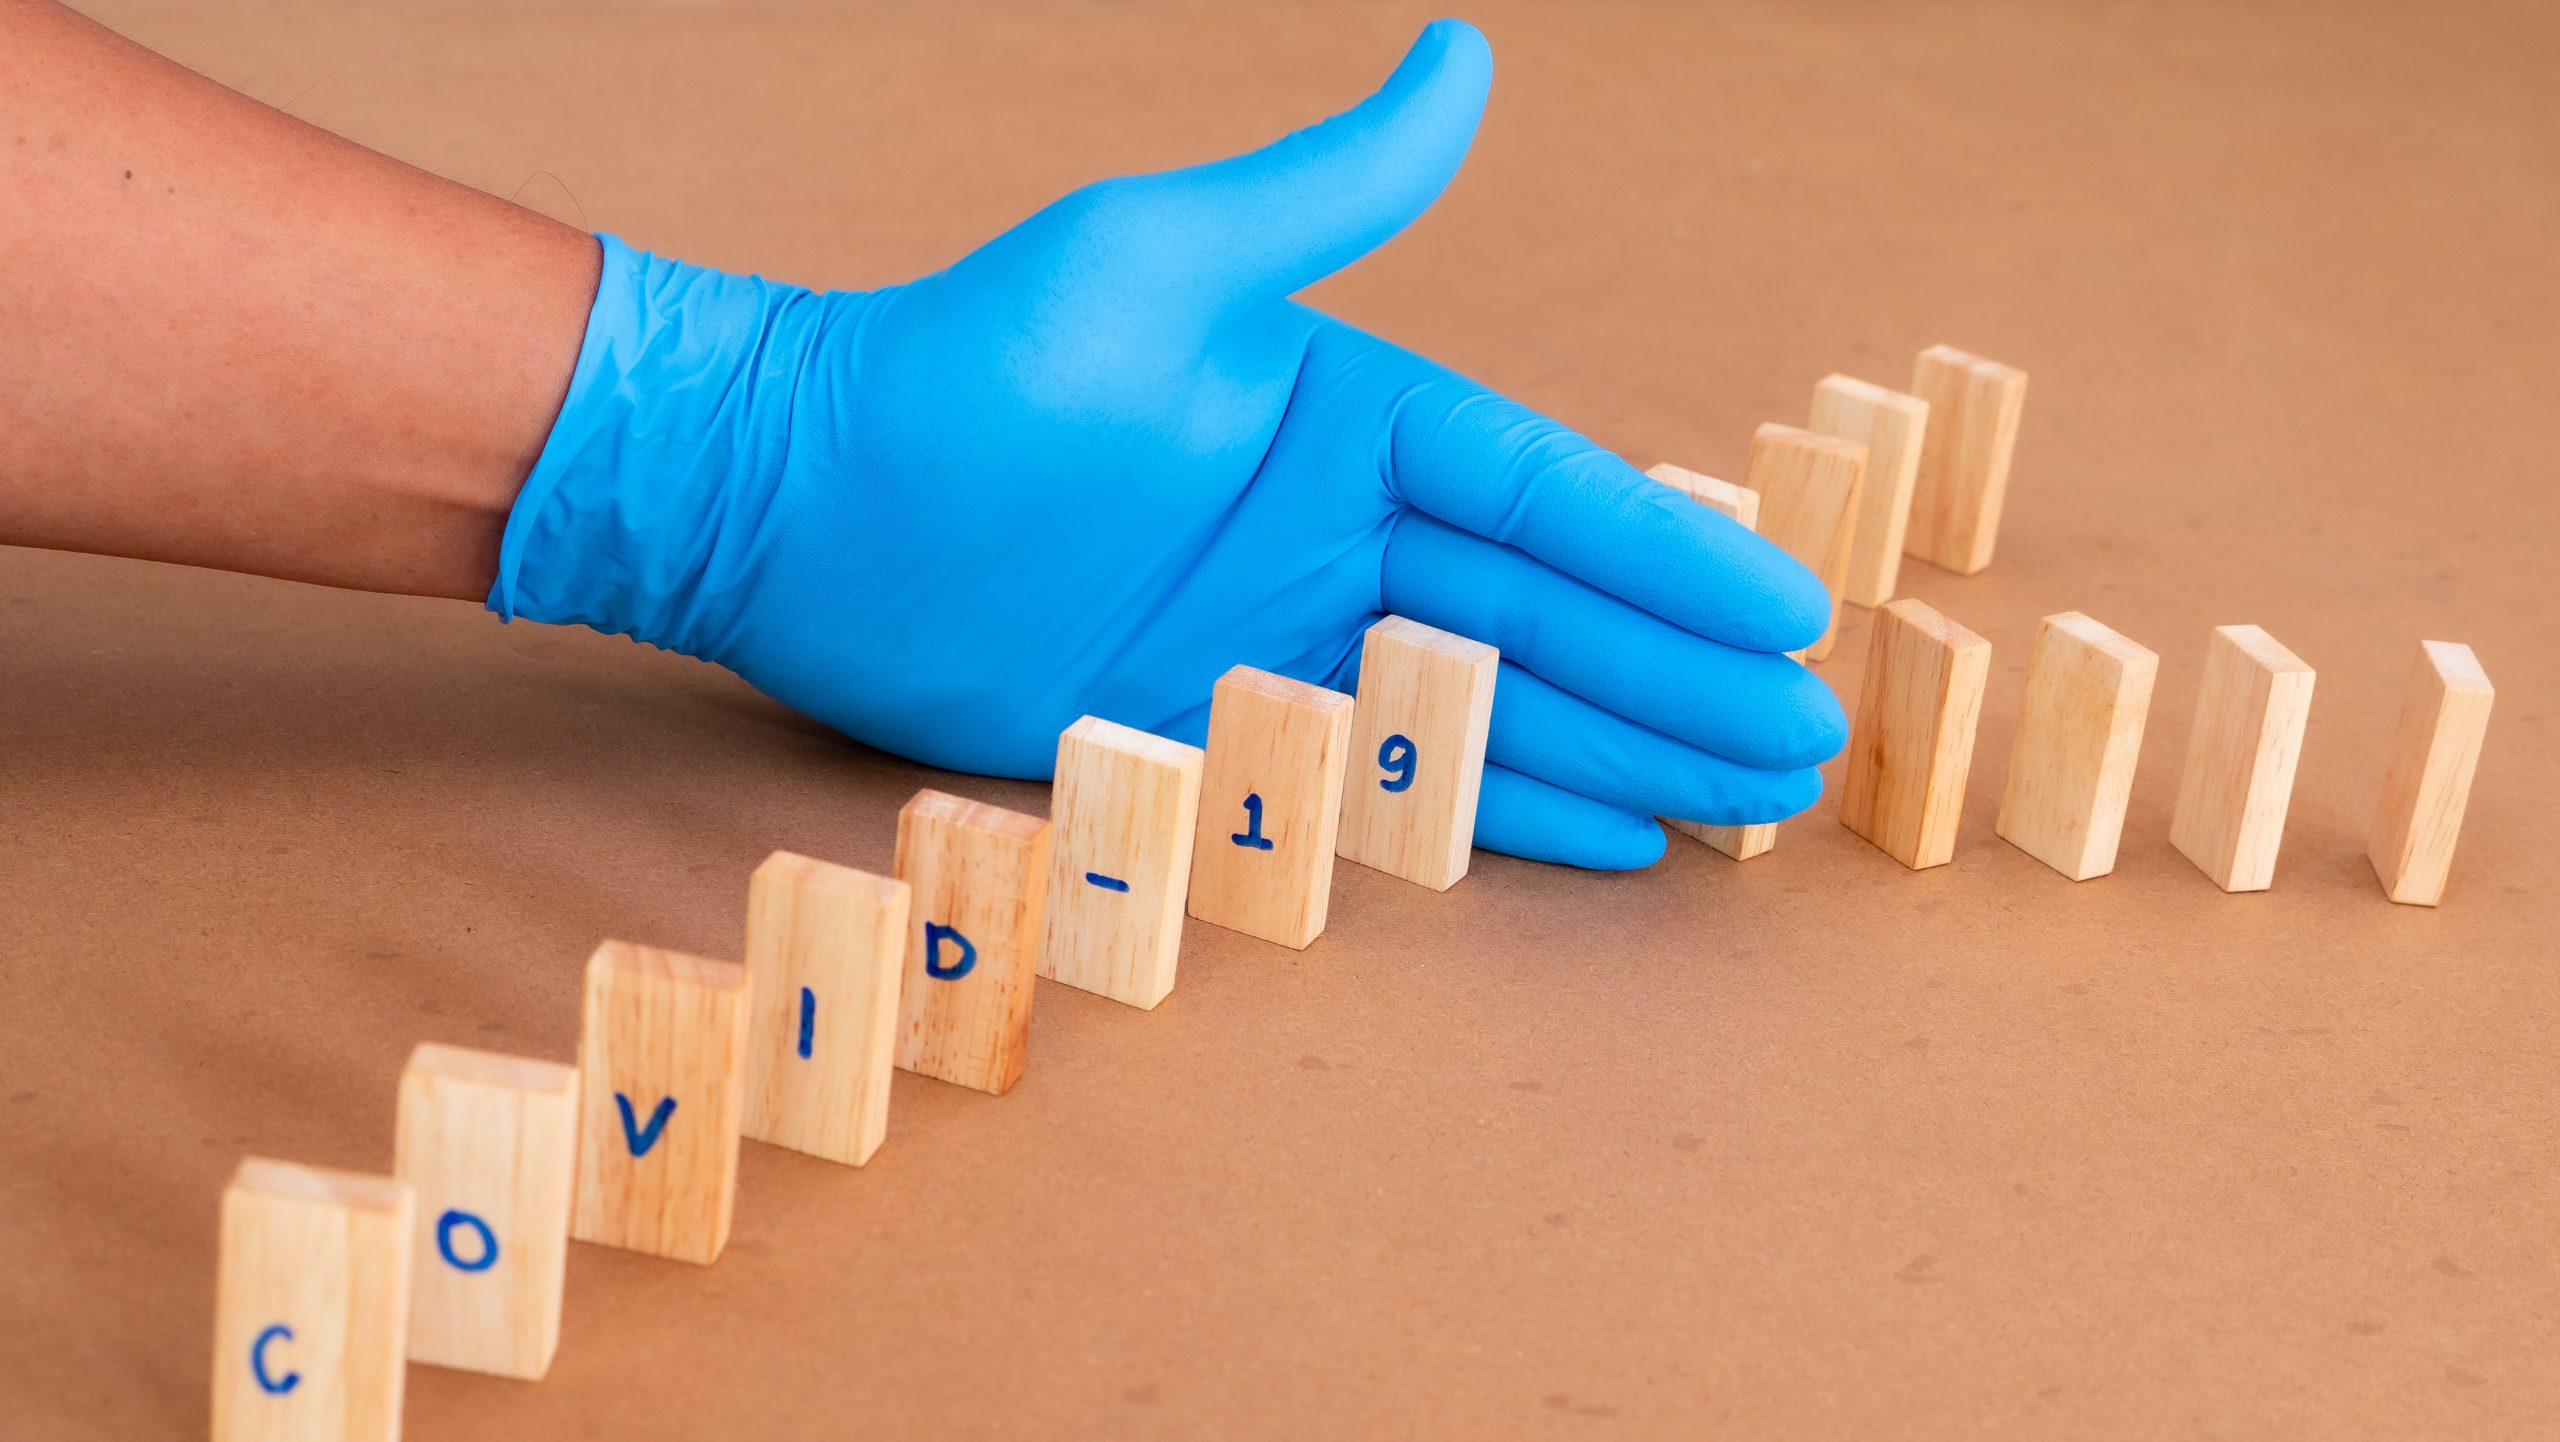 Dominos spelling word Covid-19. A gloved hand protects other dominos from the COVID labeled dominos.